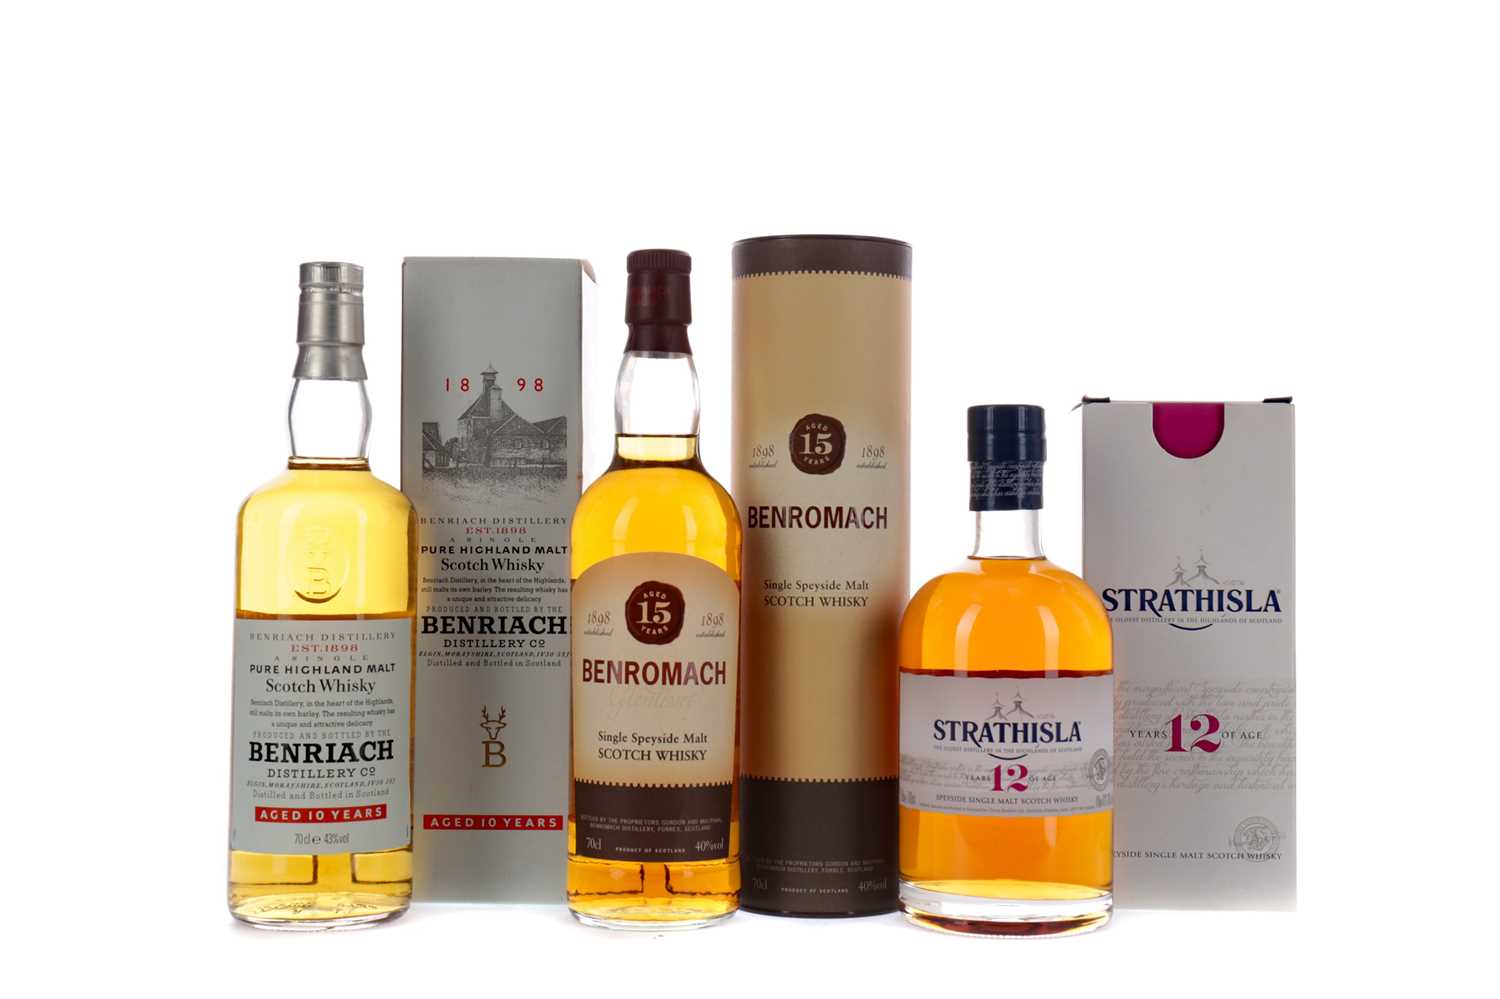 Lot 133 - STRATHISLA 12 YEARS OLD, BENRIACH AGED 10 YEARS AND BENROMACH AGED 15 YEARS